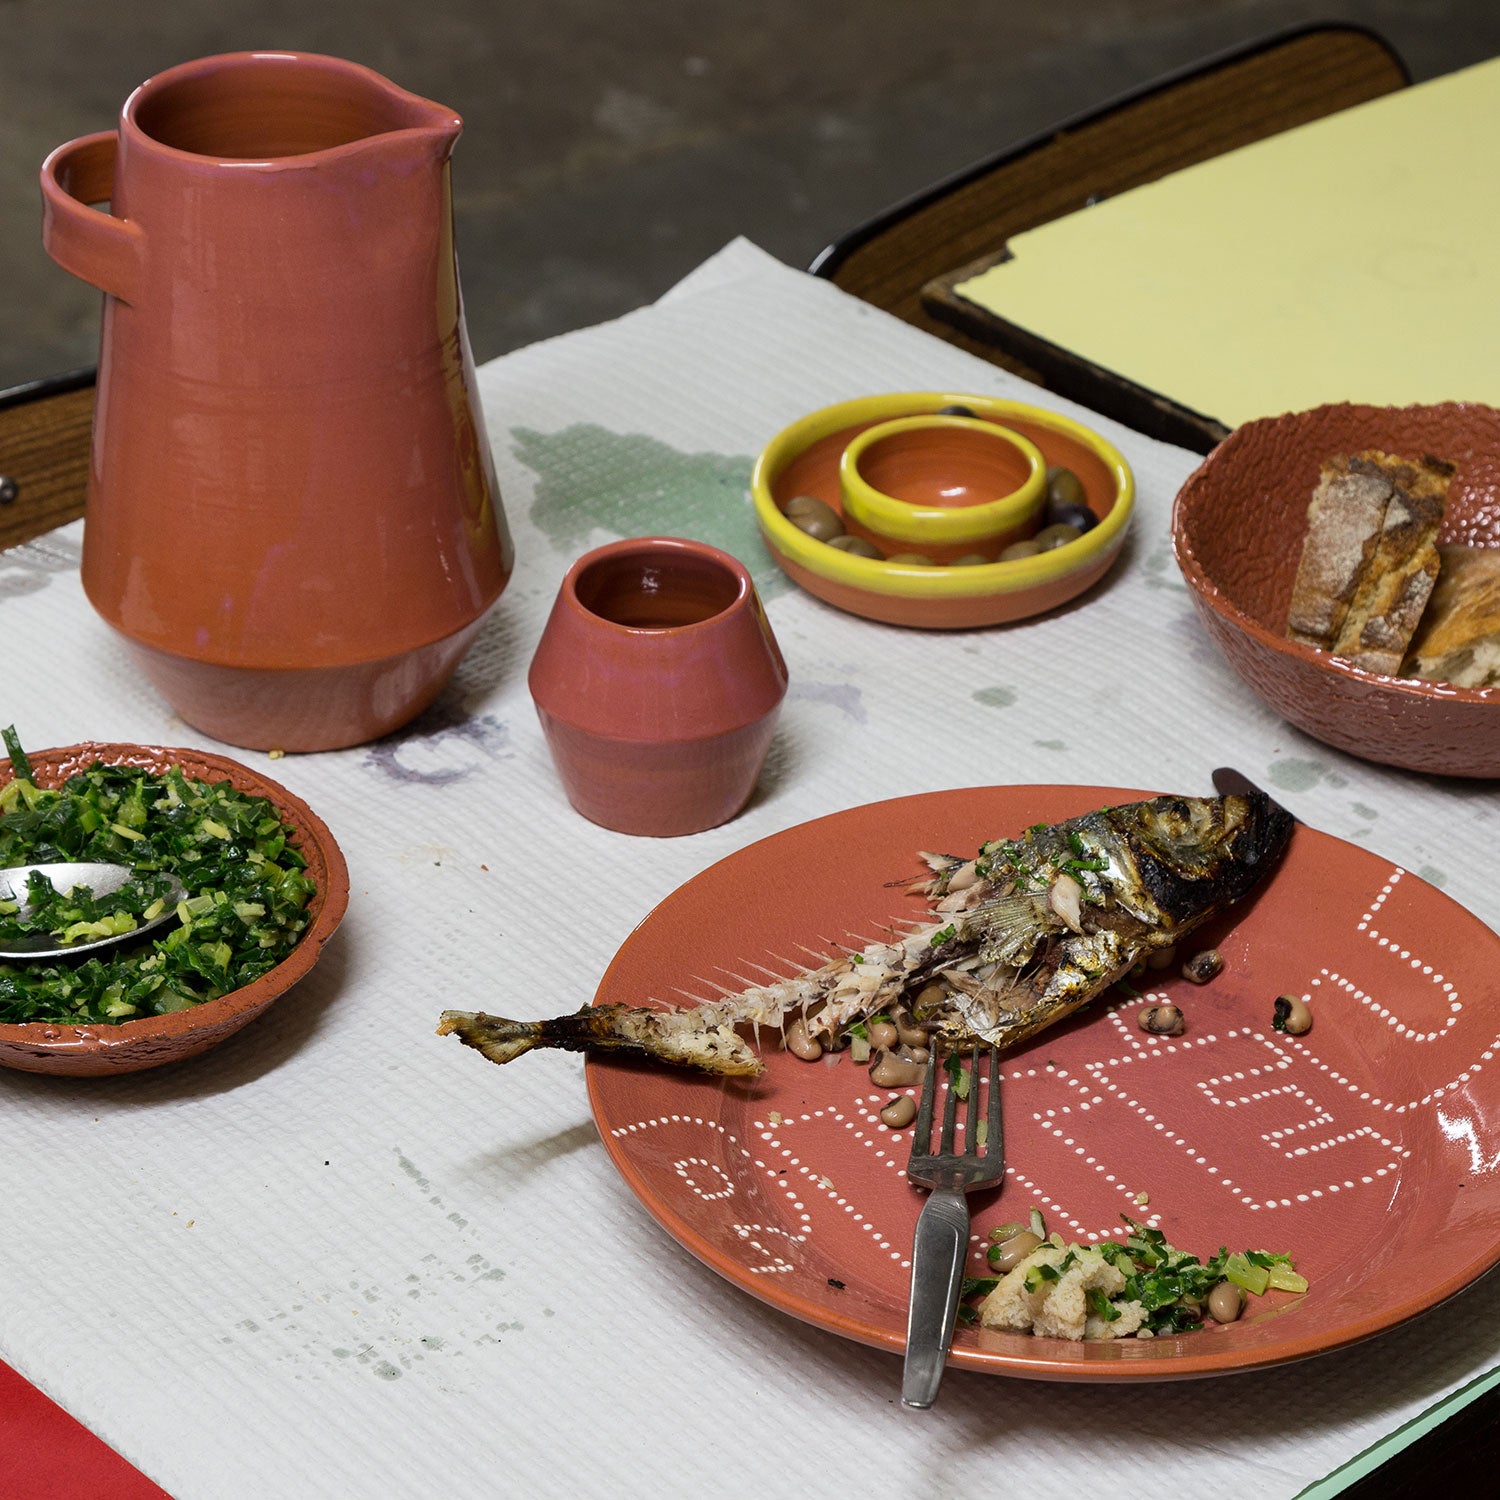 Traditional Portuguese terracotta clay tableware with a modern design.